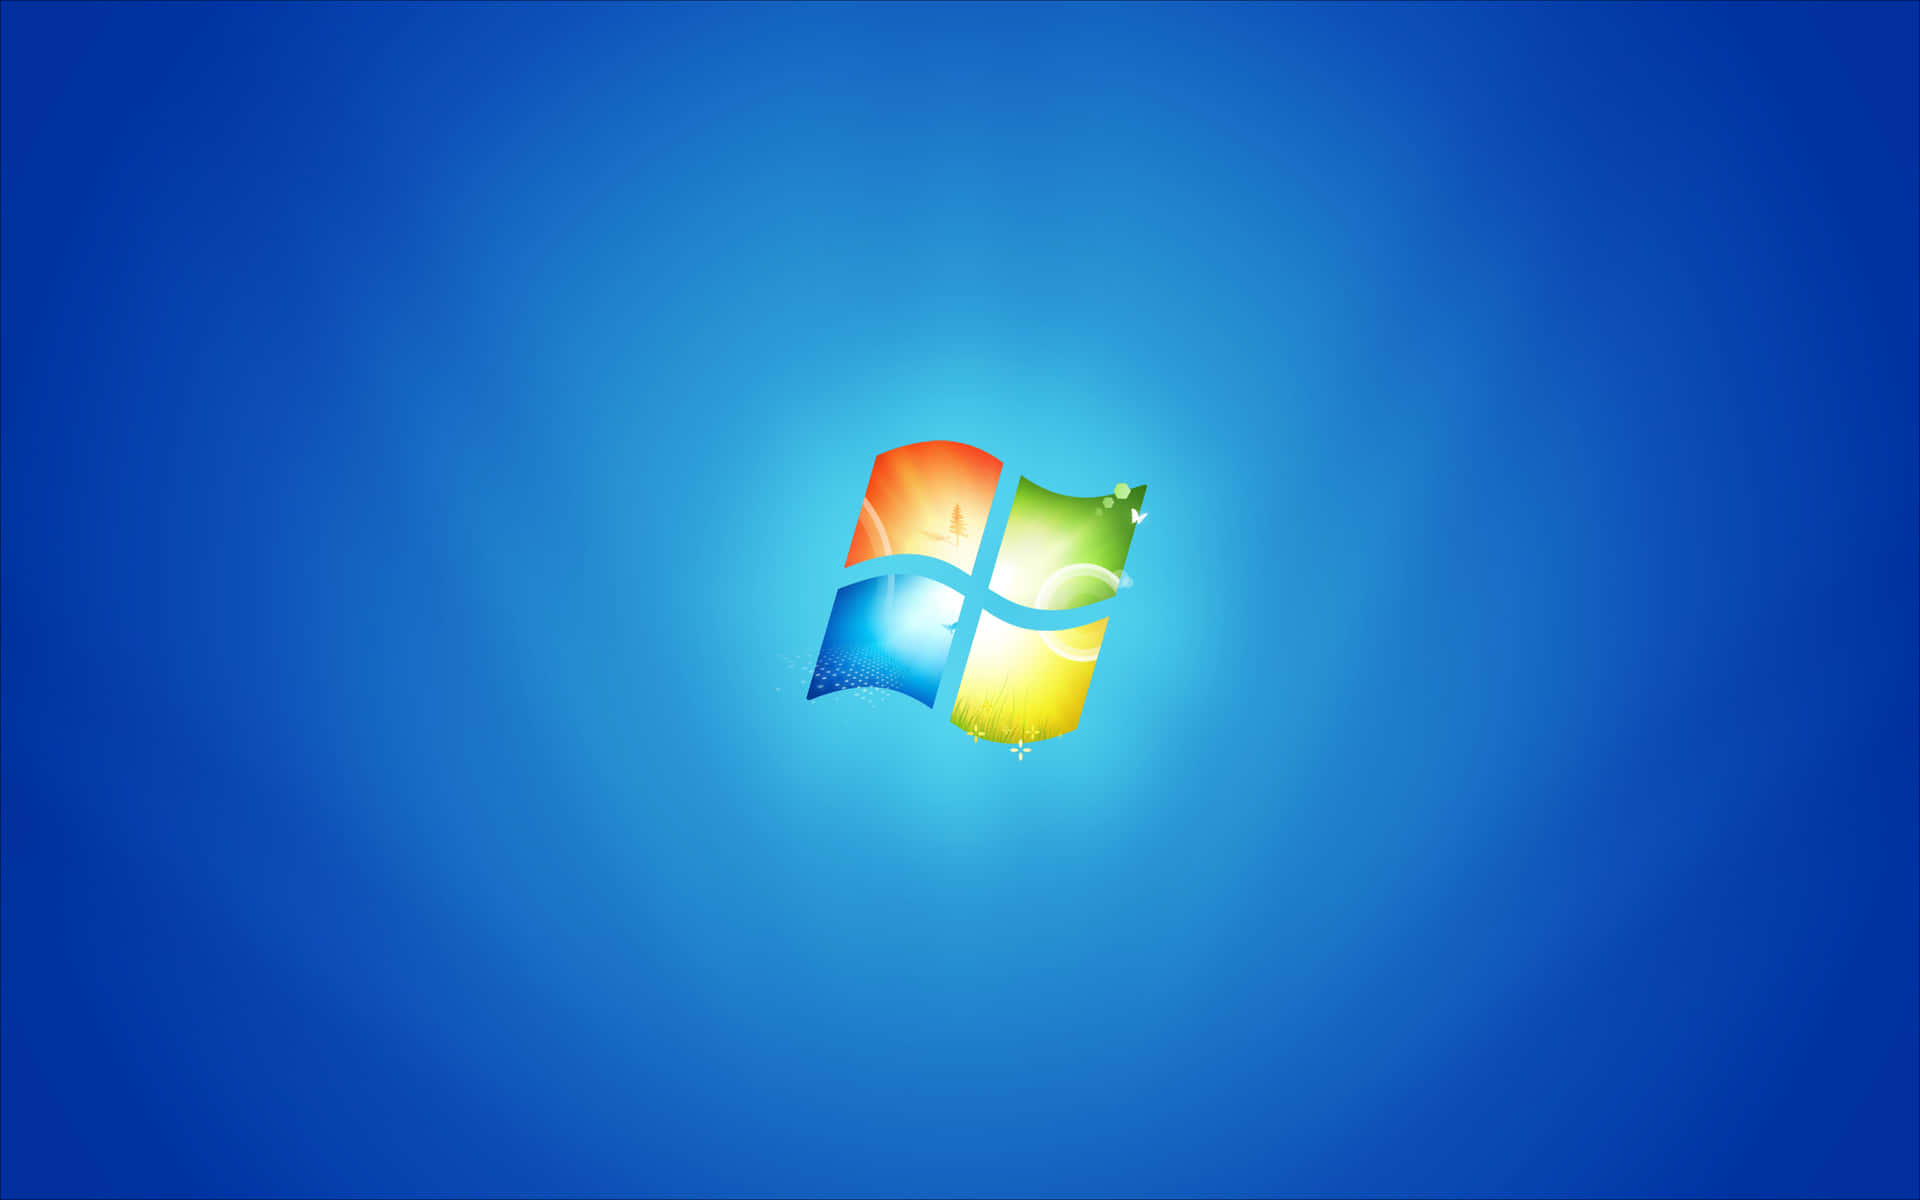 Microsoft's Windows 7: An efficient and modern operating system